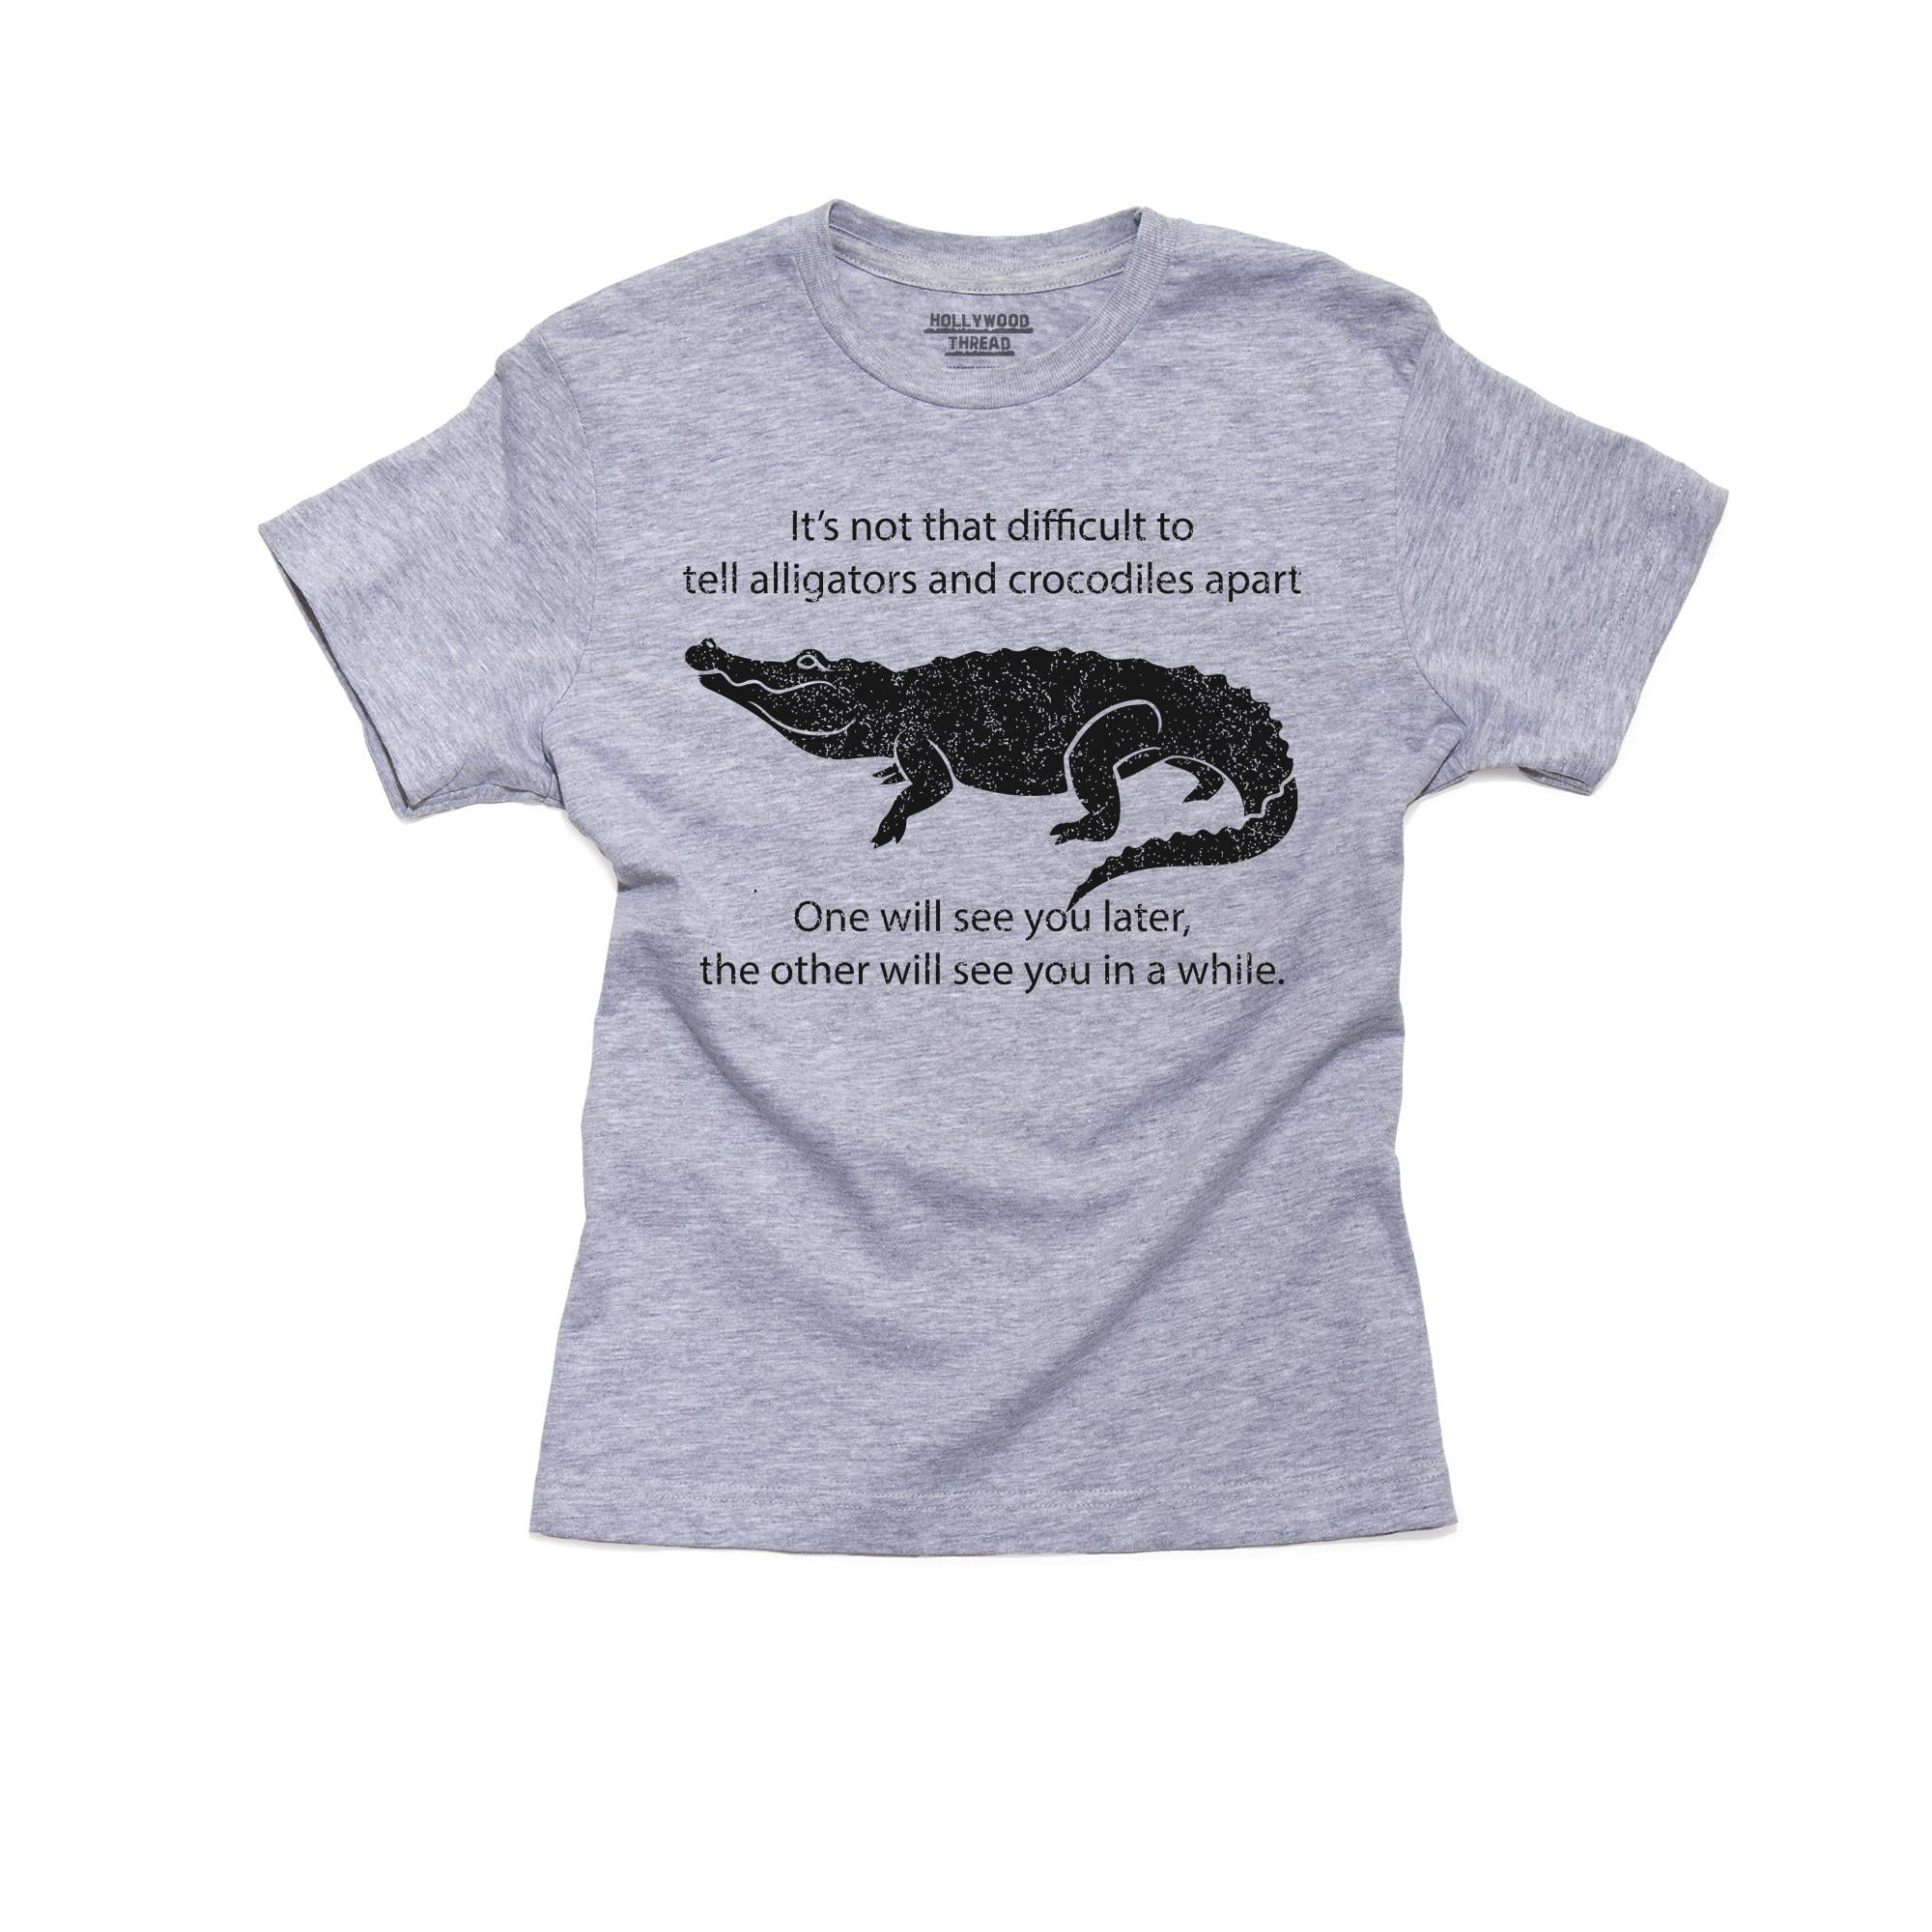 Later Alligator & After a While Crocodile Funny Boy's Cotton Youth Grey  T-Shirt 